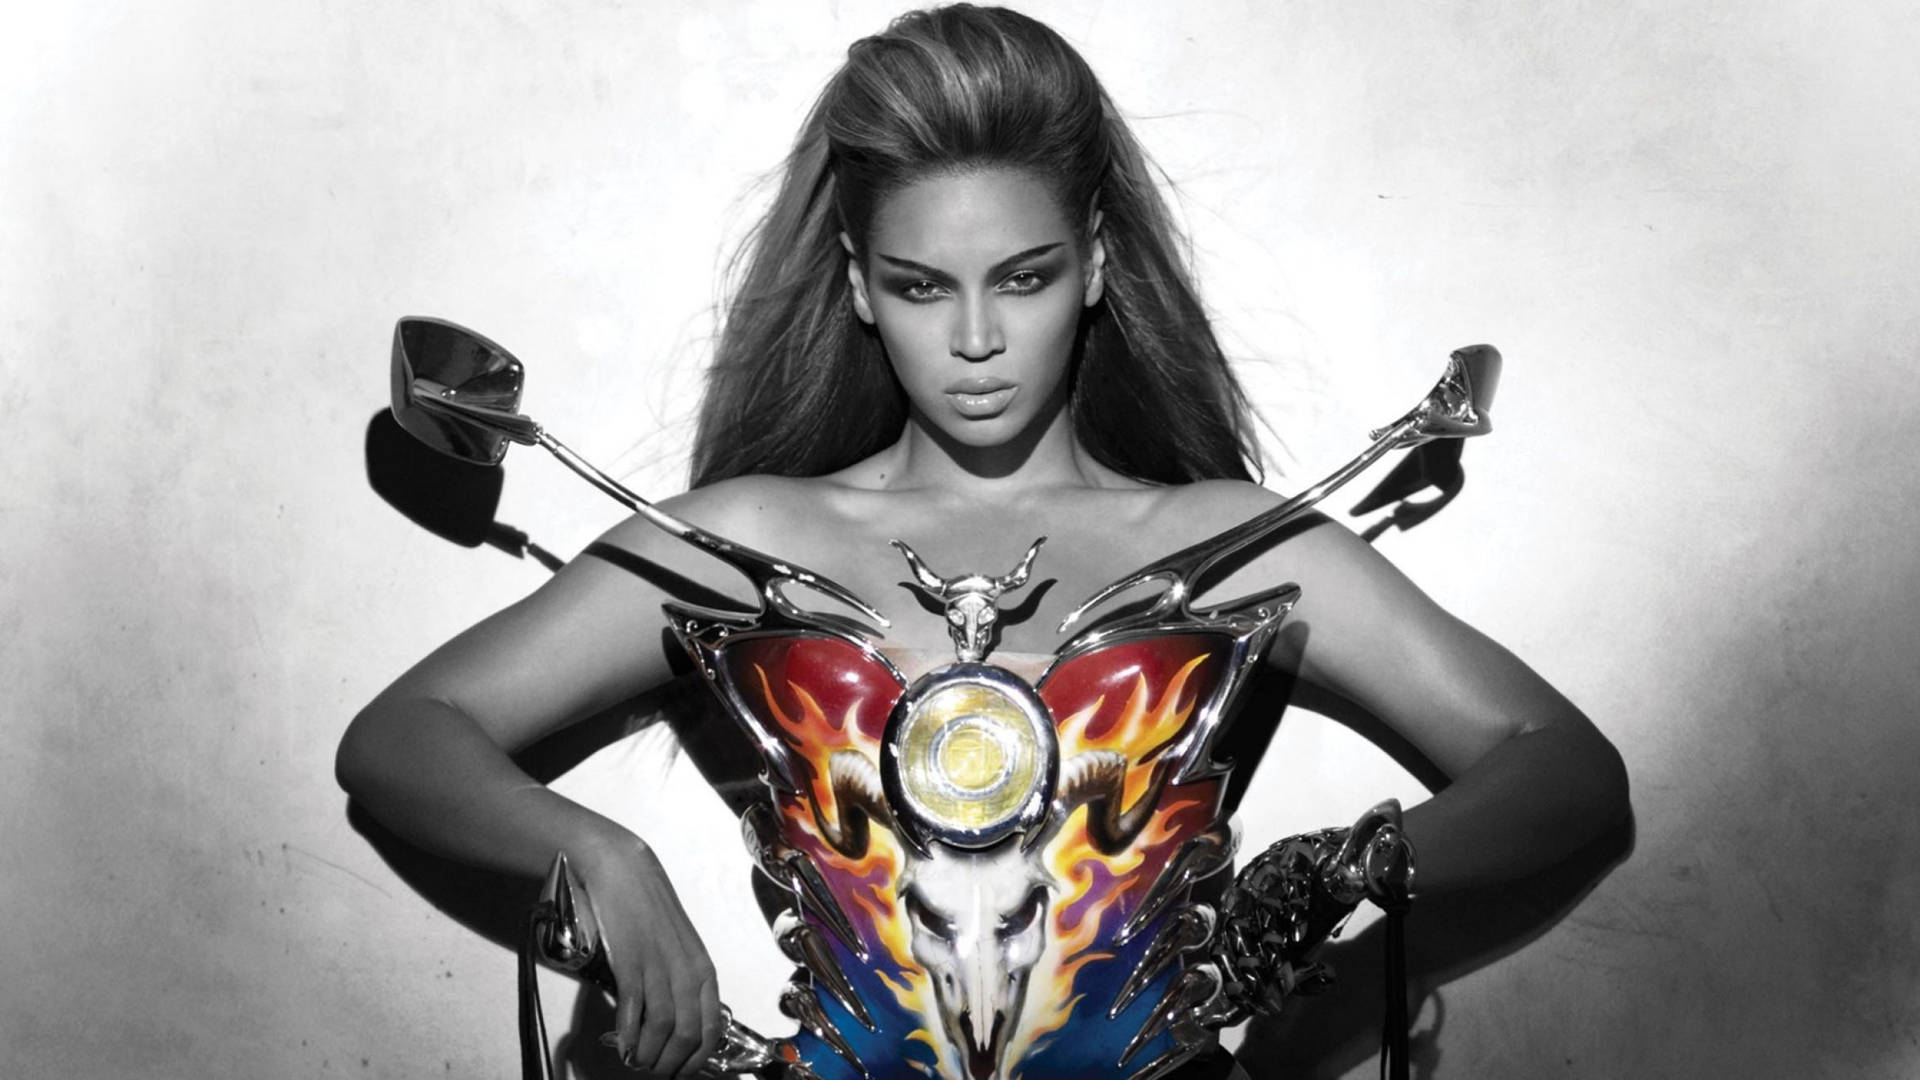 "Punk Rock Queen: Beyonce Puts On A Motorcycle Outfit!" Wallpaper